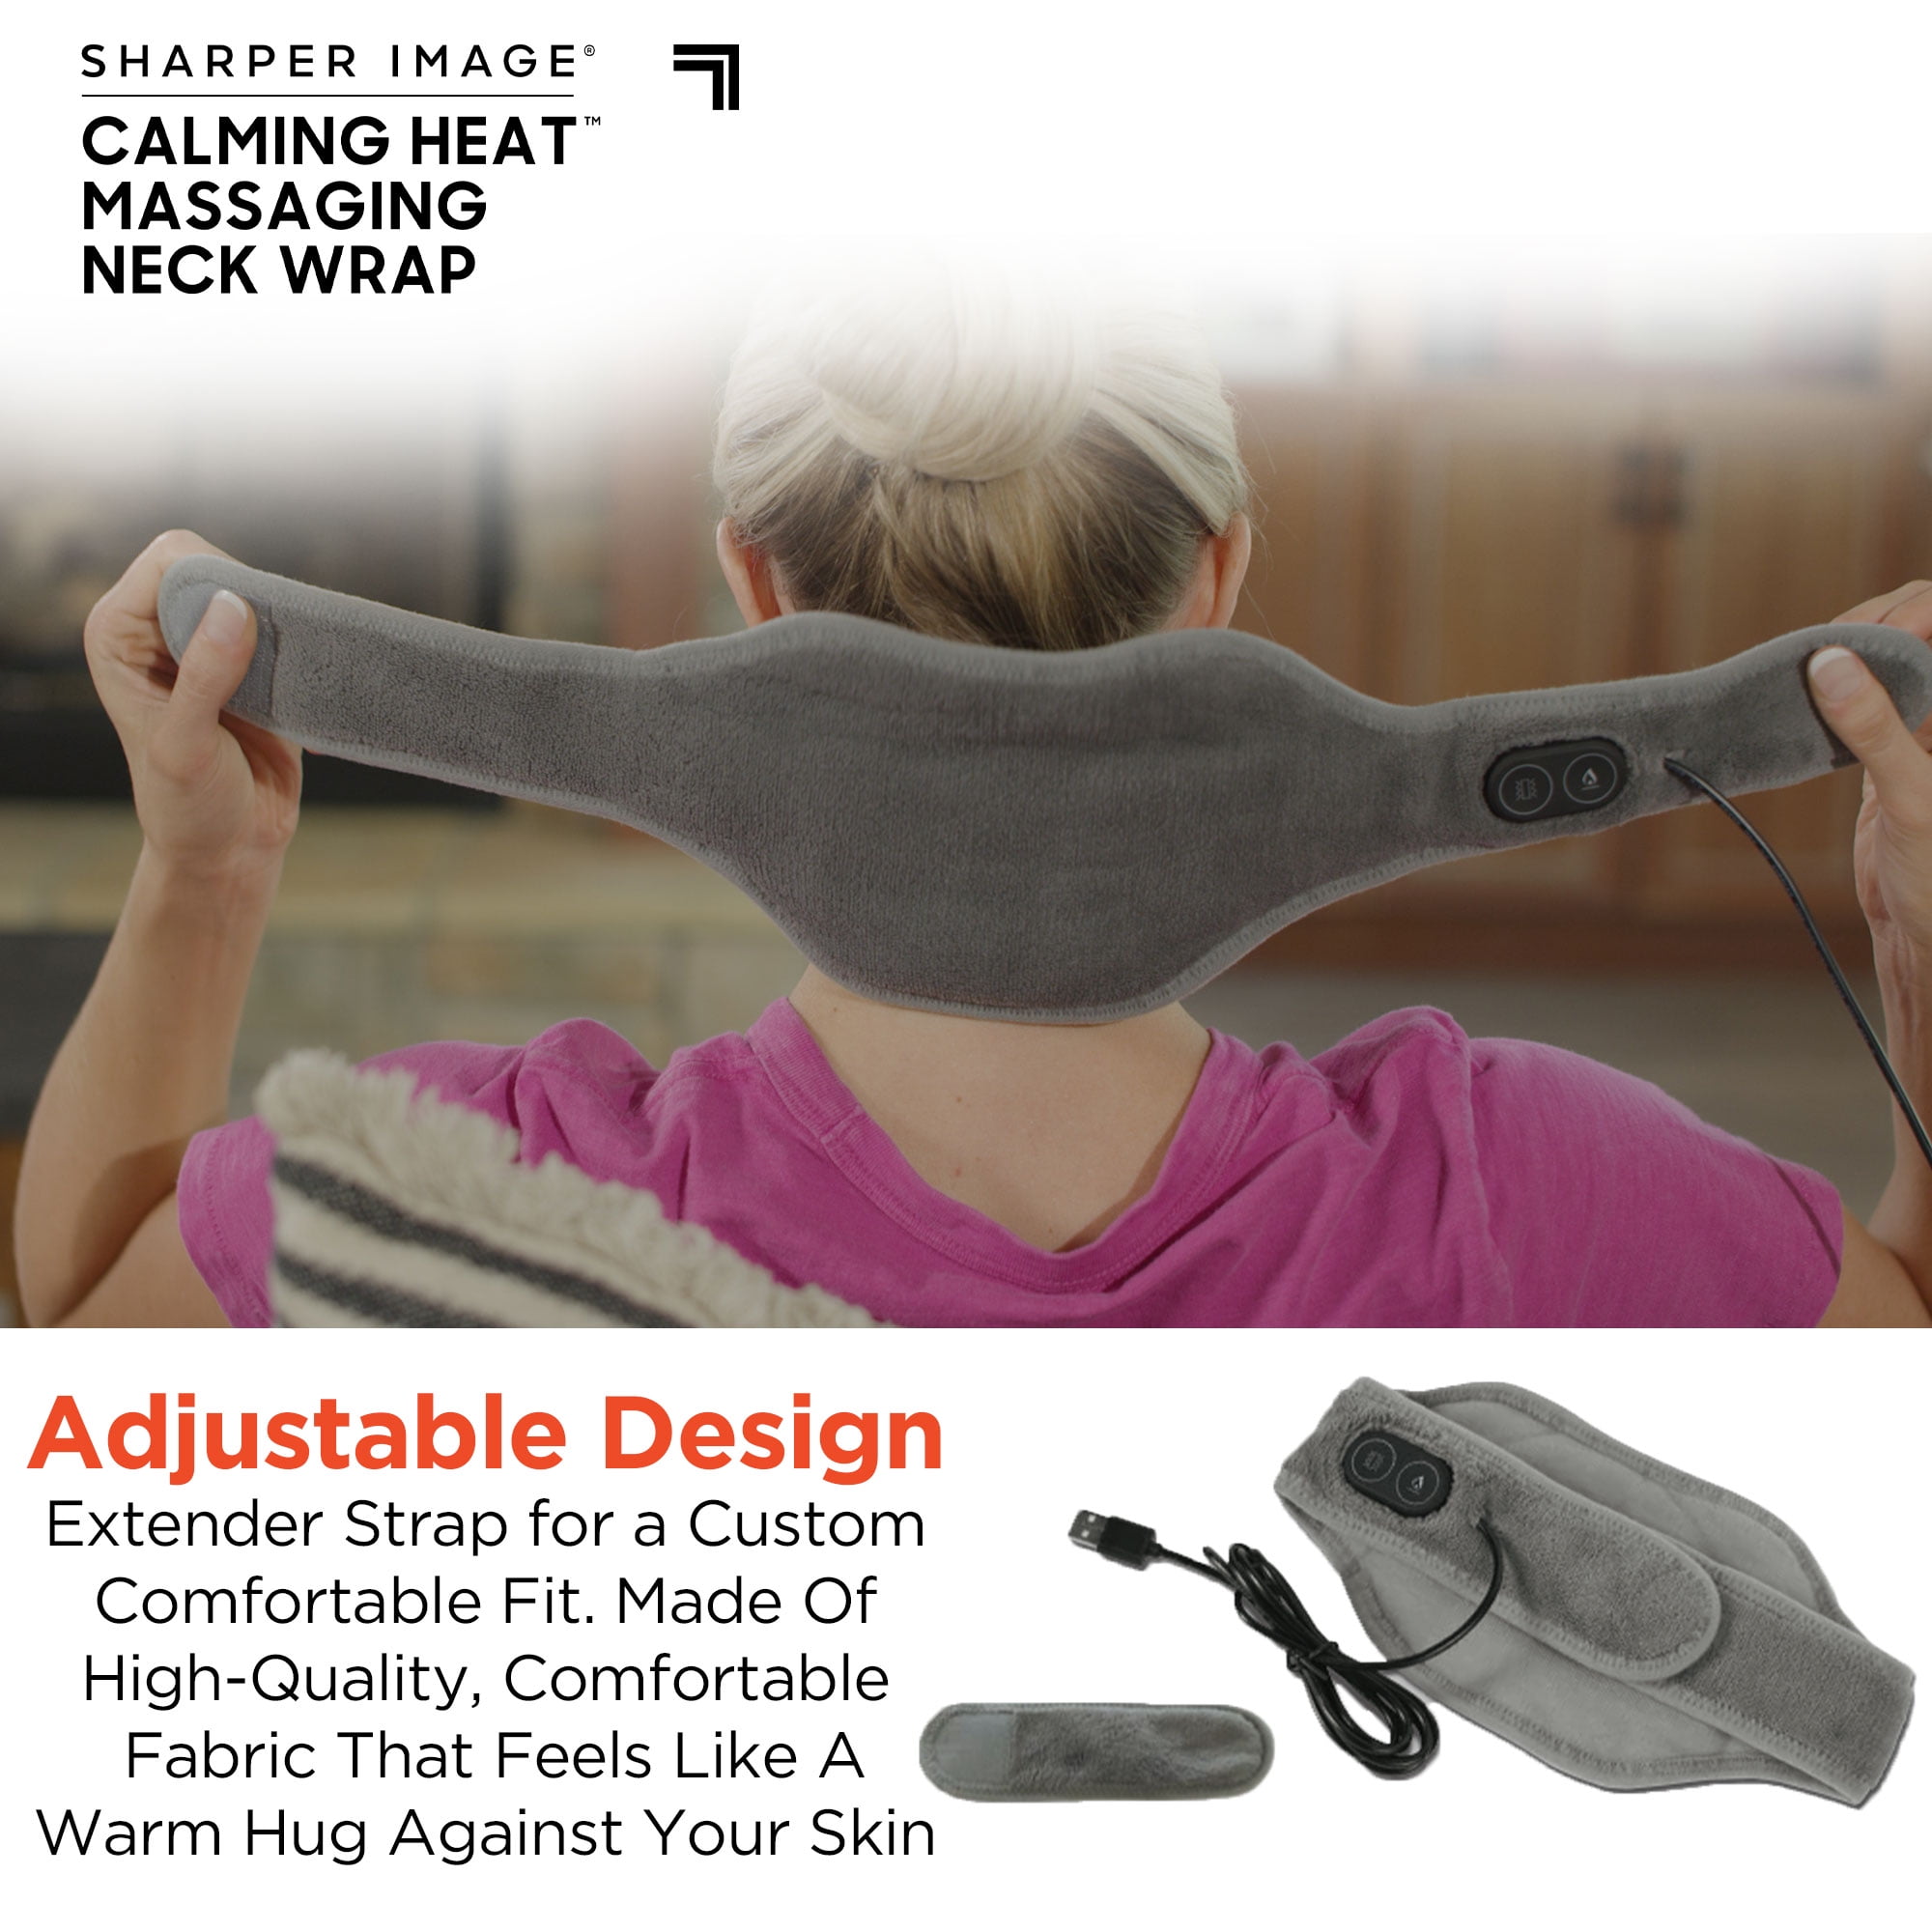 CALMING COZY 23 in. x 5 in. Massaging Heating Neck Wrap, Grey CWT18004 -  The Home Depot